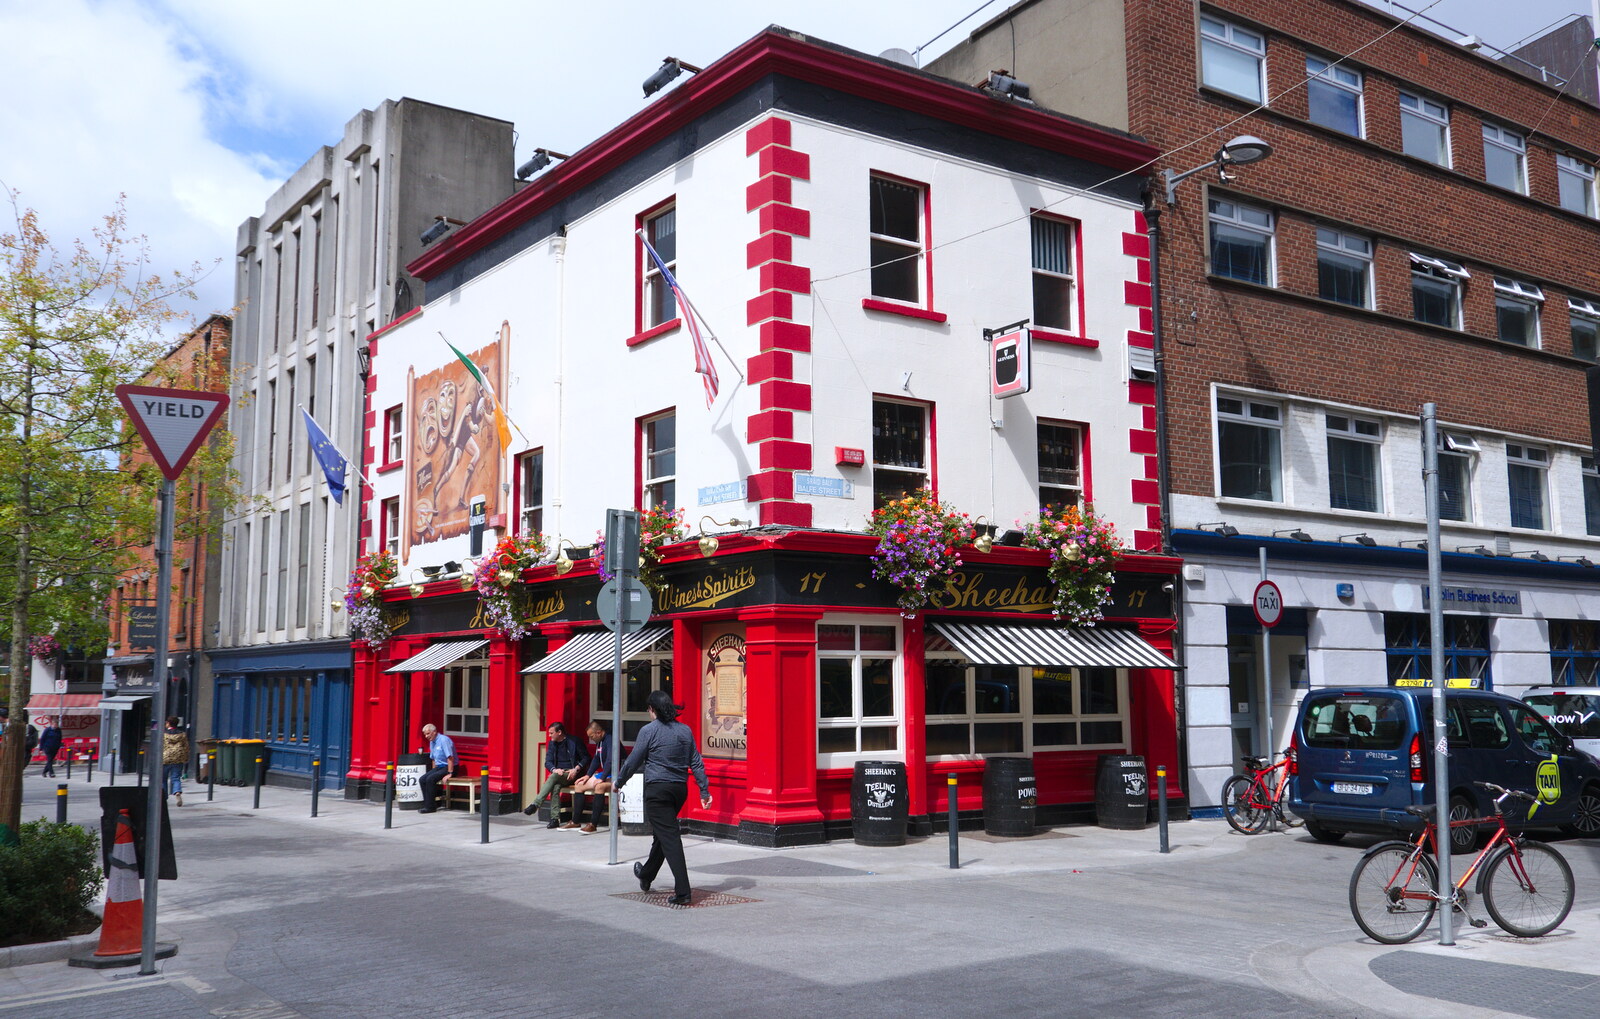 Brightly-coloured bar from Busking in Temple Bar, Dublin, Ireland - 12th August 2019